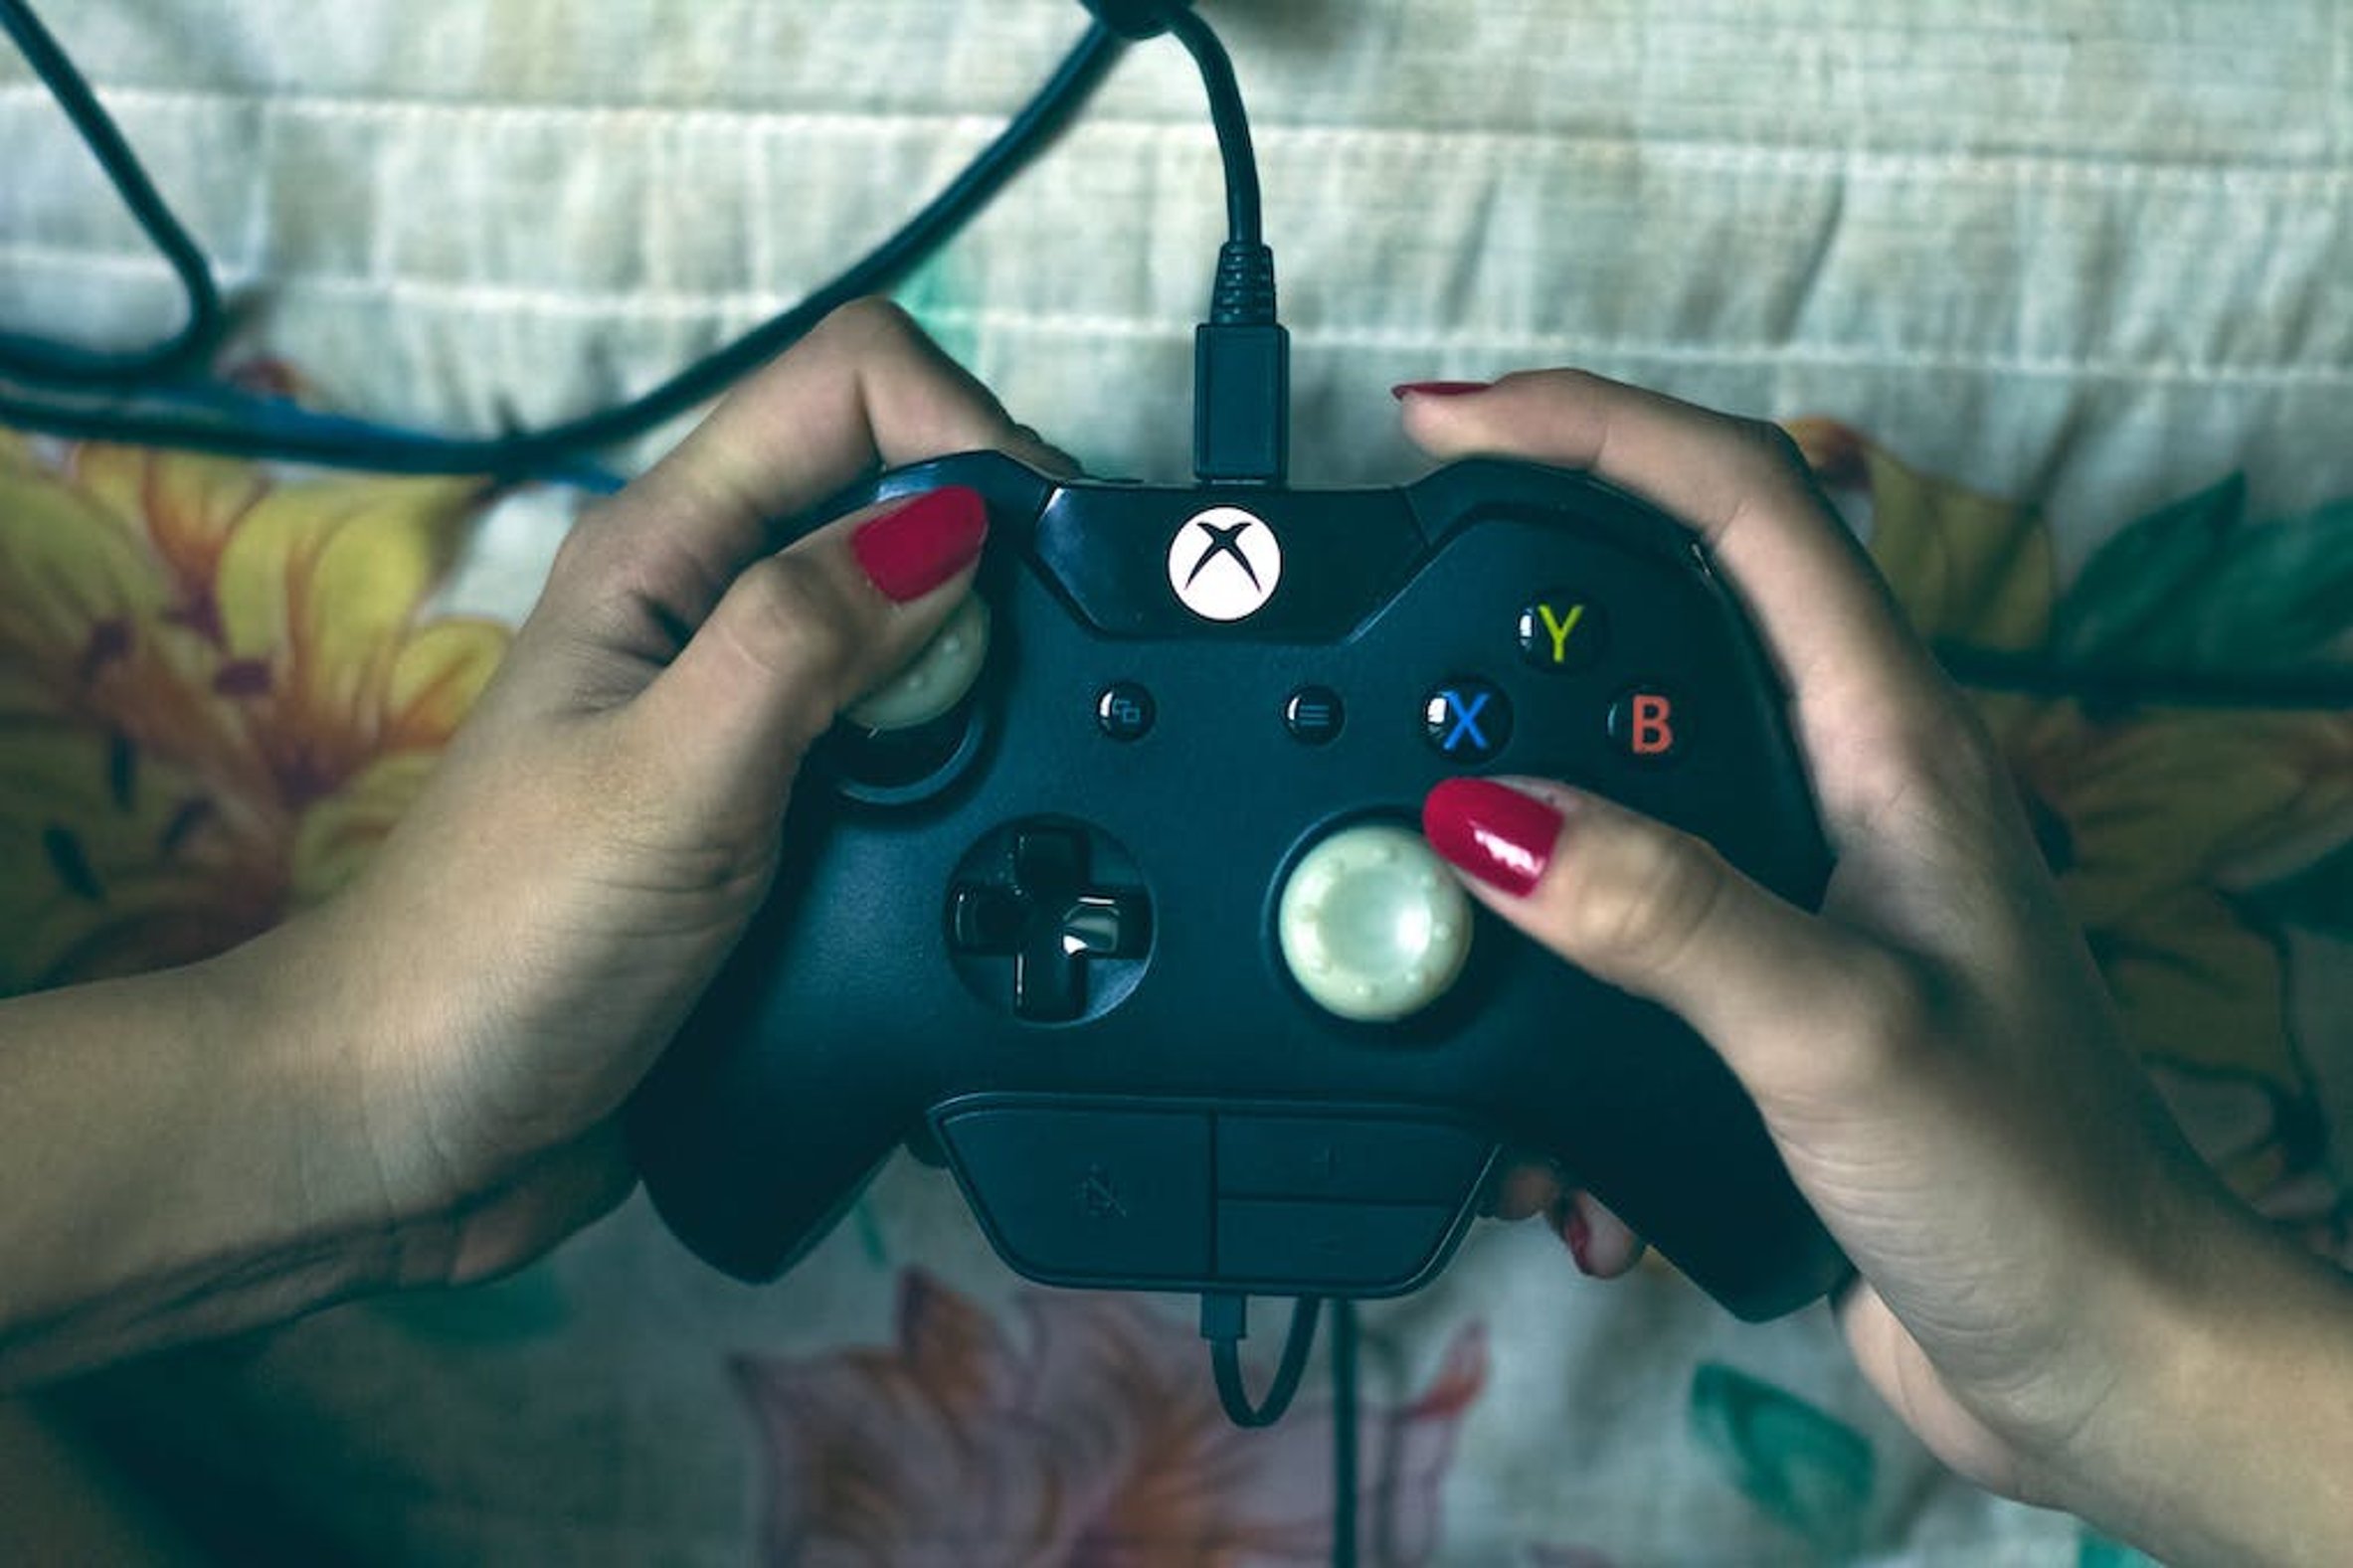 Casting a Web Series about a Female Gamer!